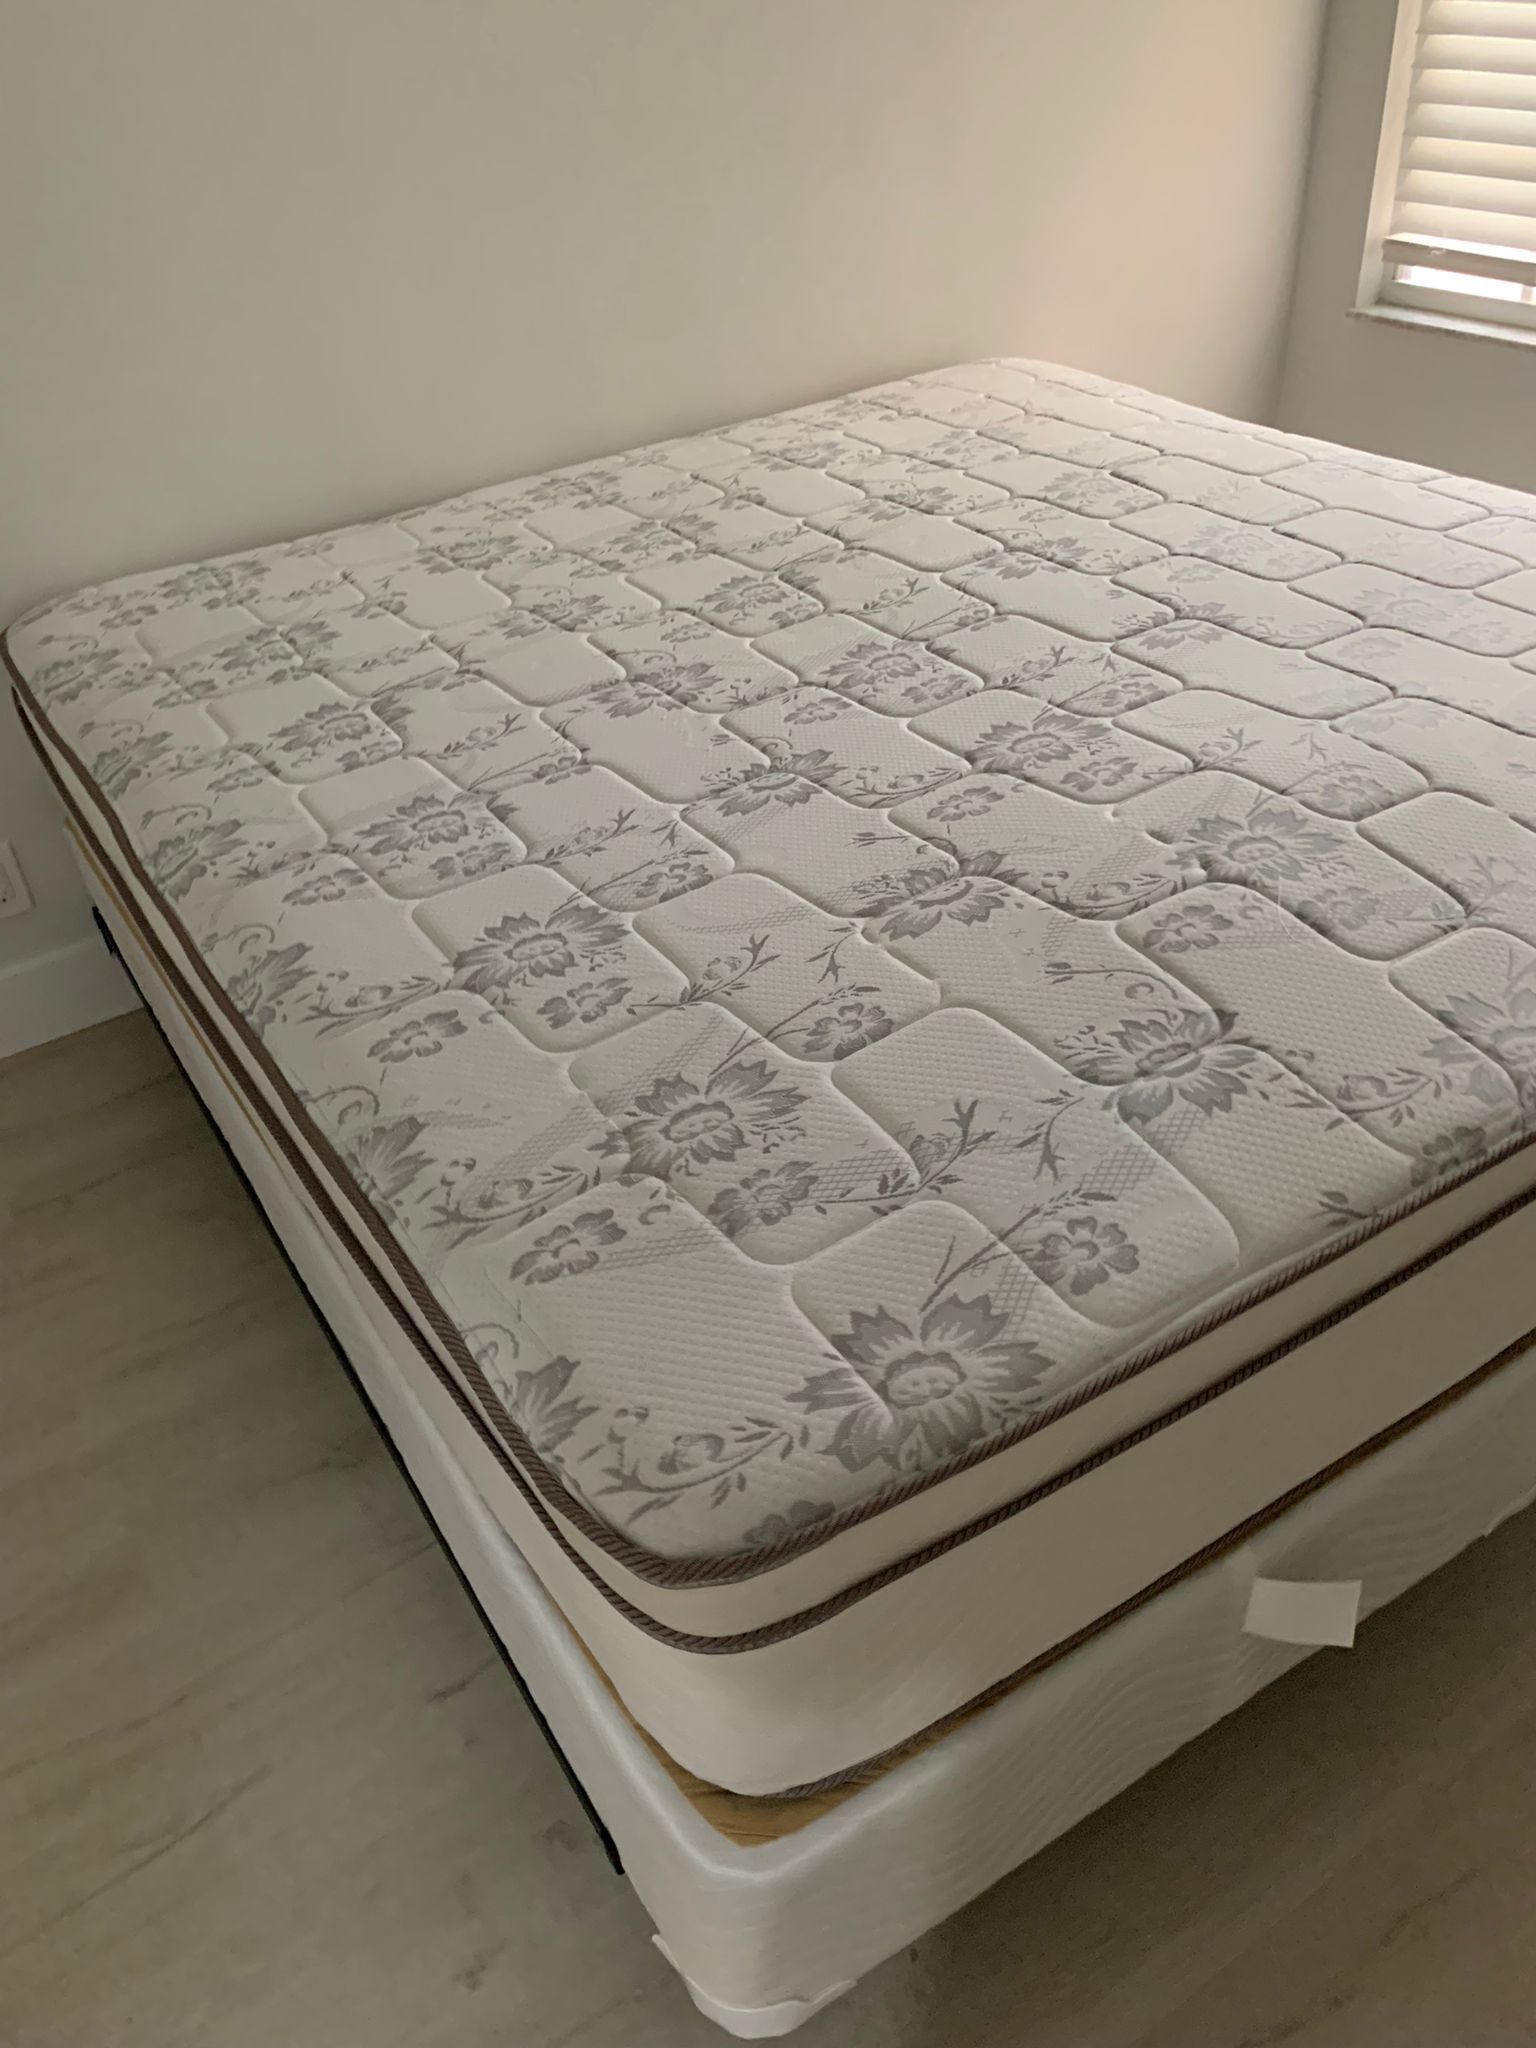 NEW King Mattress  And 2 Box Springs  Bed Frame Is Not Included 